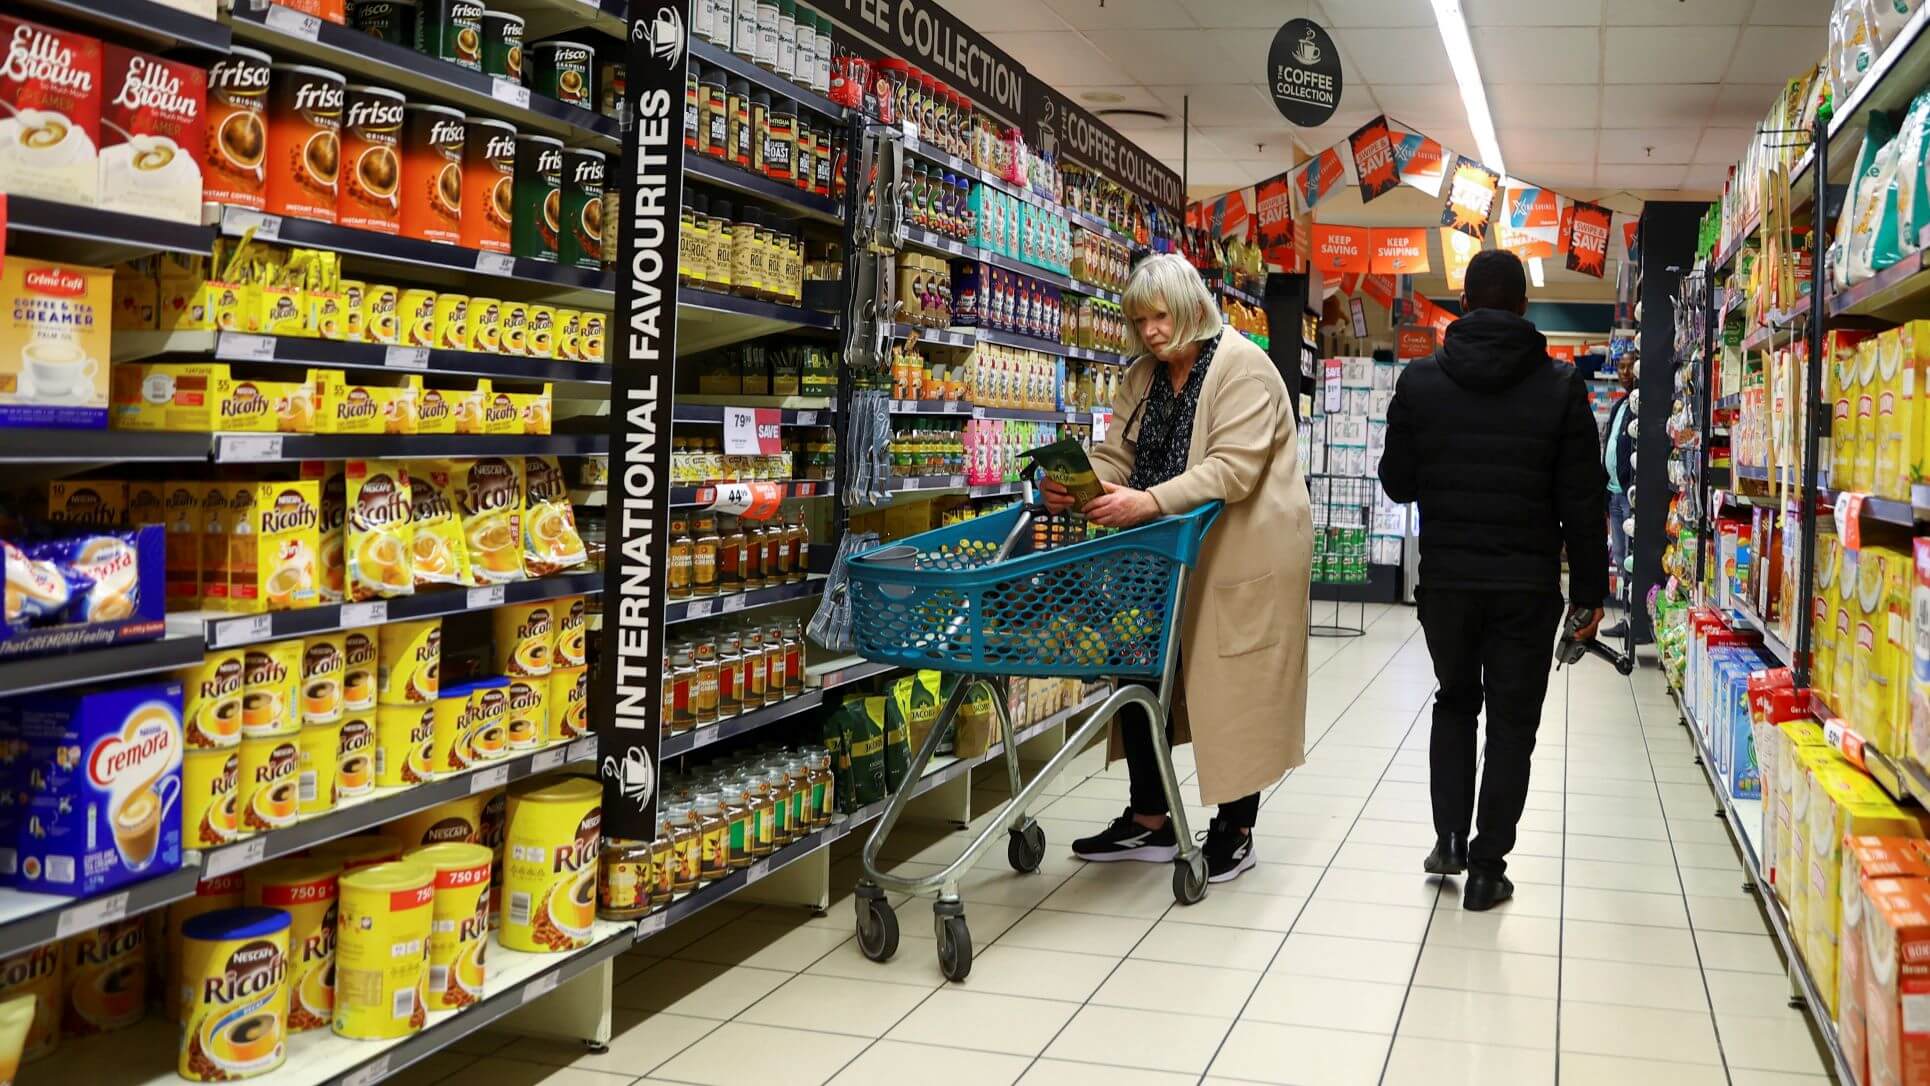 UK Shoppers, Feeling The Inflation Hit, Cut Back On Non-Essentials